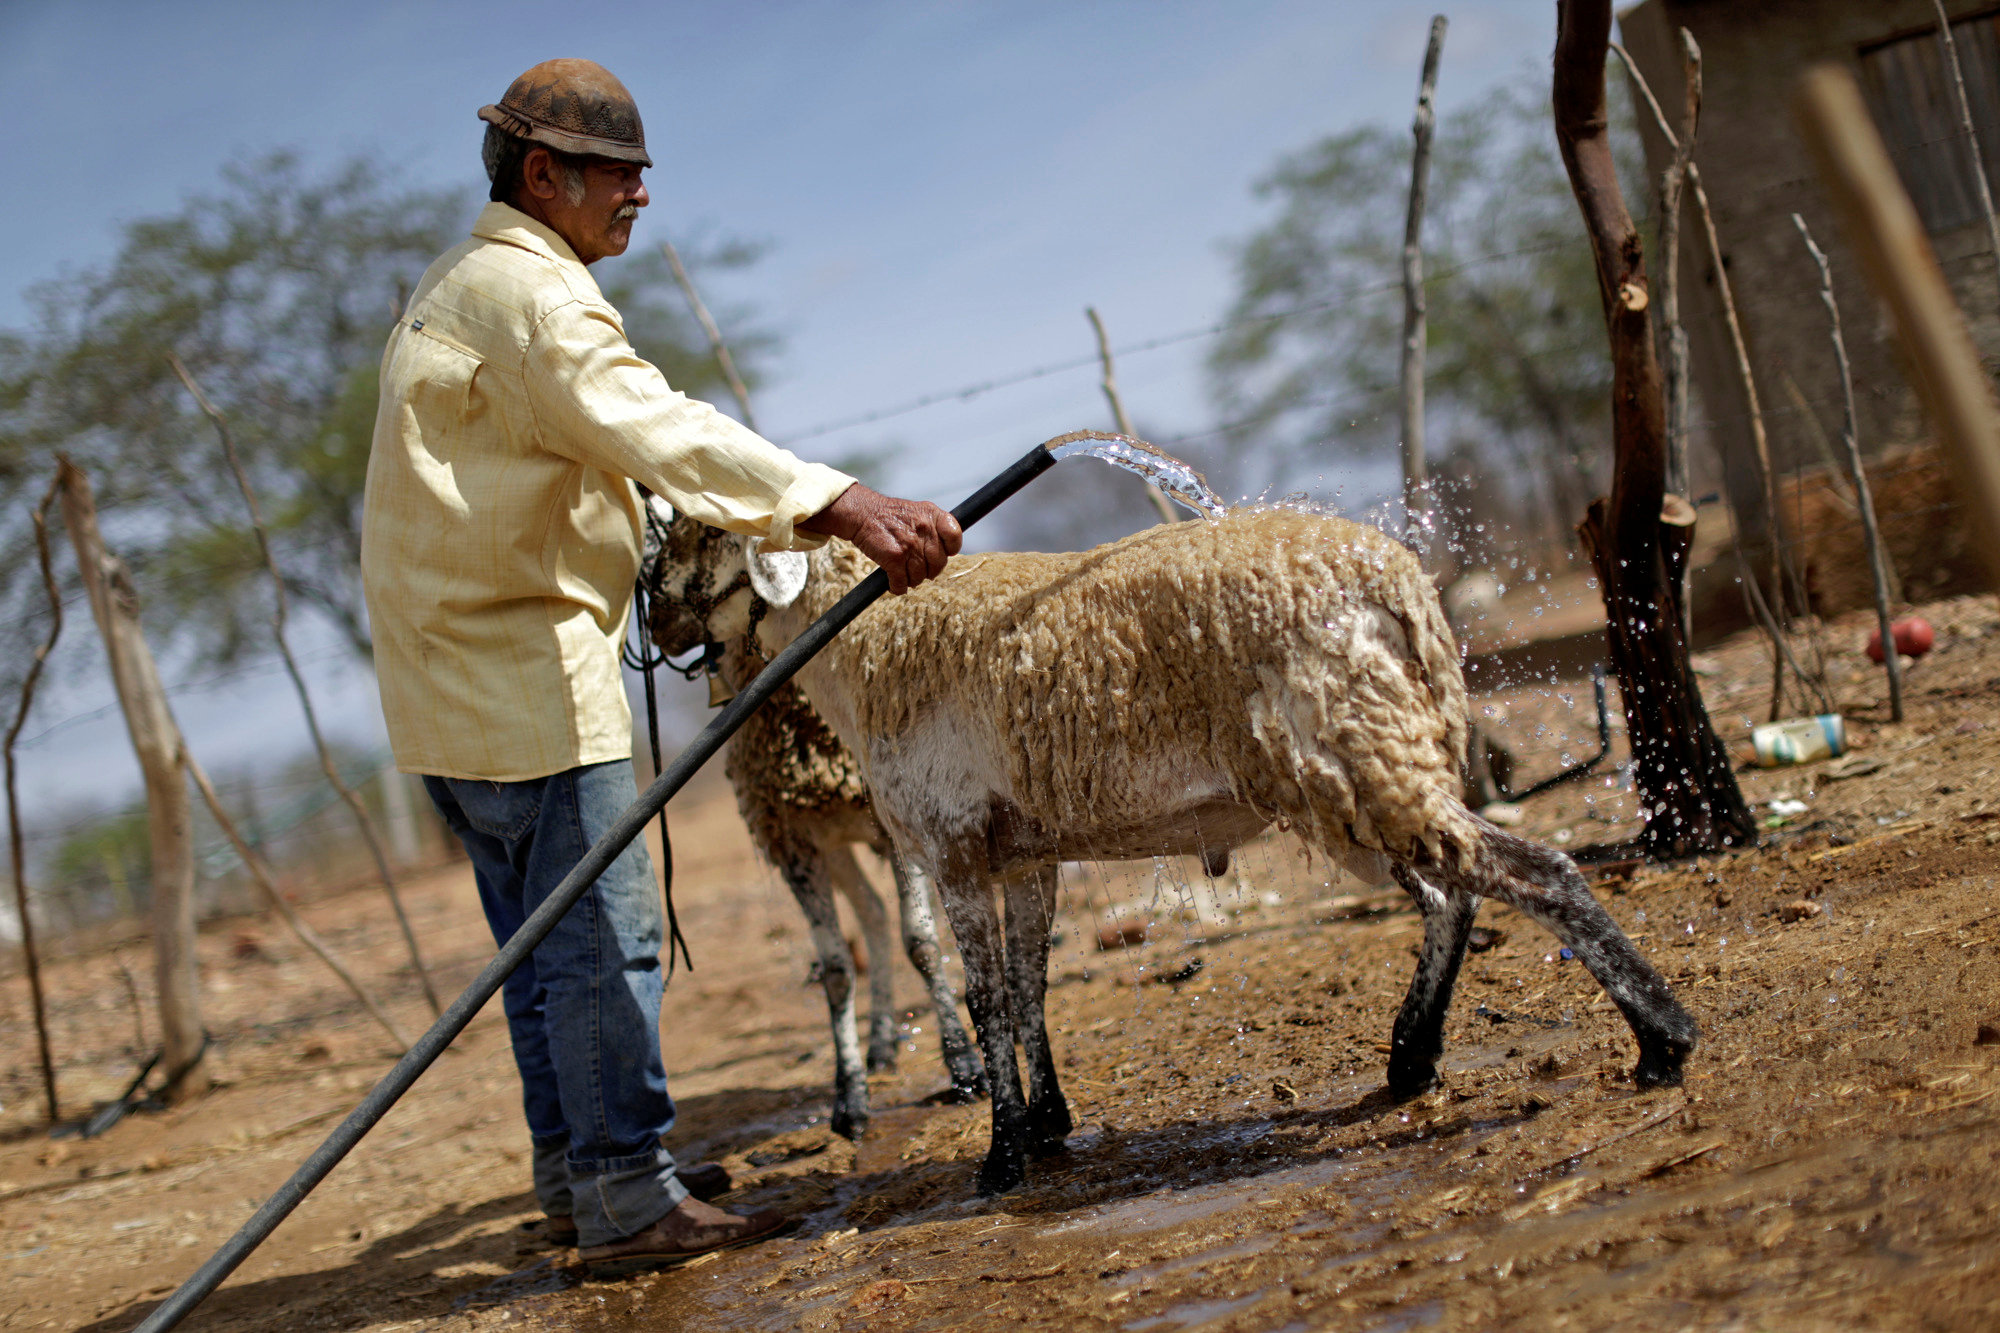 Heleno Campos Ferreira, 65, sprays water on sheep after fetching it from a well on a farm in Pocoes municipality in Monteiro, Paraiba state, Brazil, February 13, 2017. REUTERS/Ueslei Marcelino